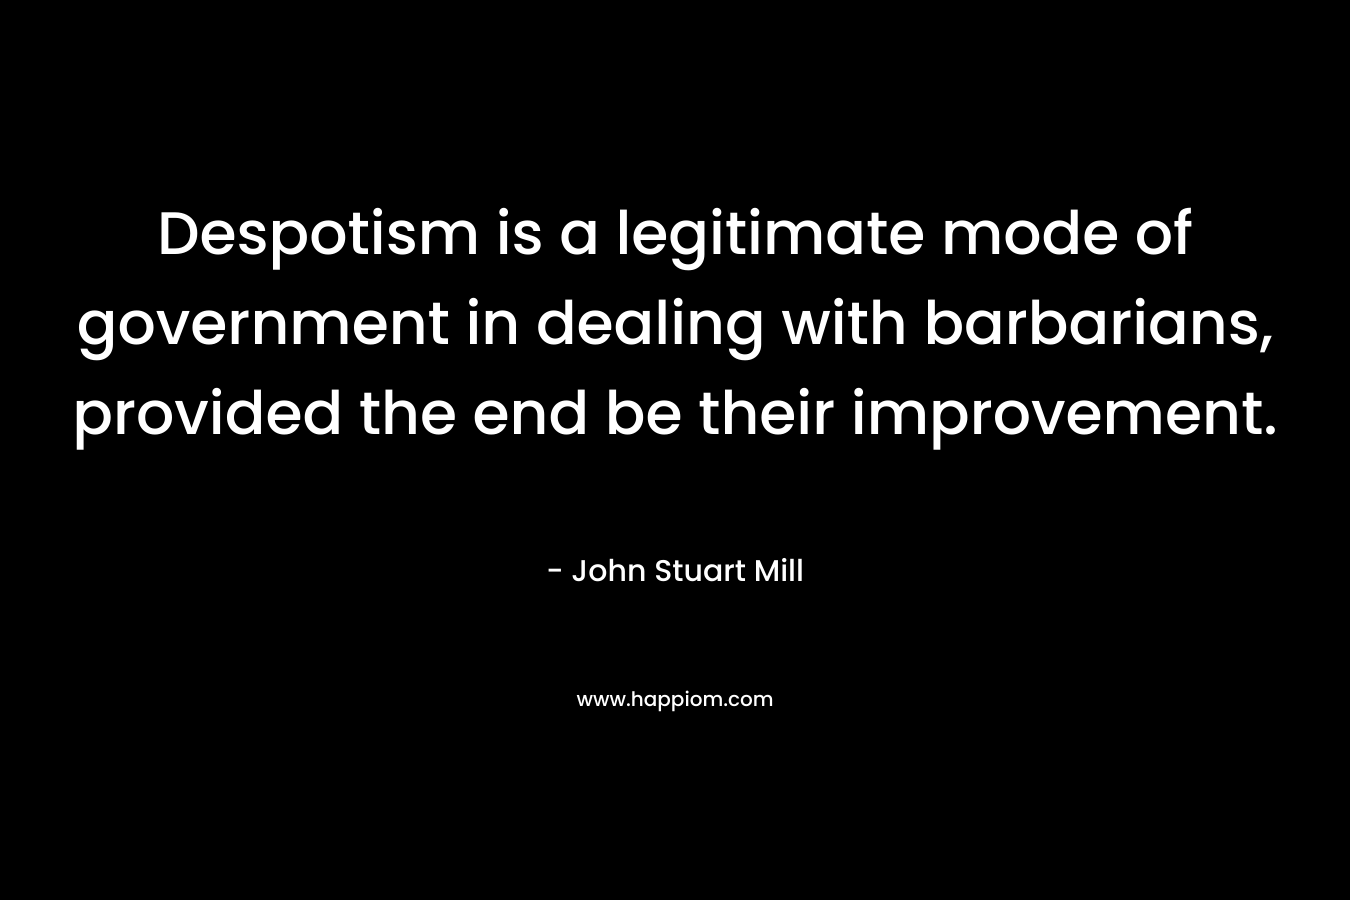 Despotism is a legitimate mode of government in dealing with barbarians, provided the end be their improvement.